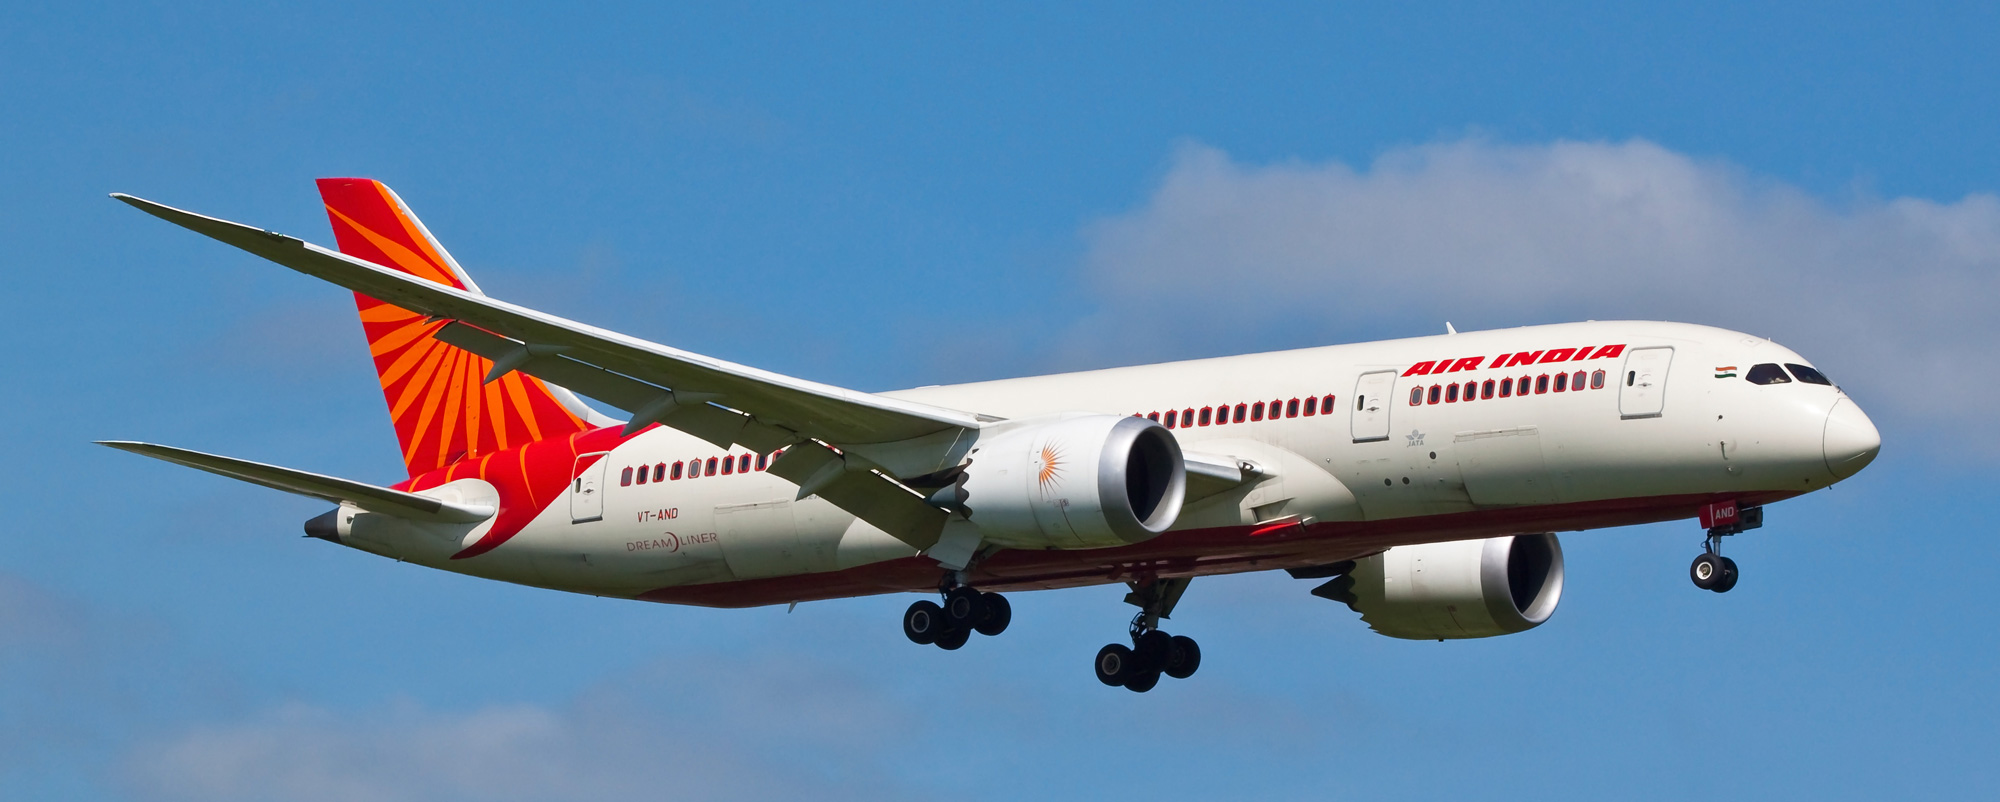 Air India’s woes stem from a huge debt overhang from the purchase of 111 aircraft and giving away of slots and flying rights